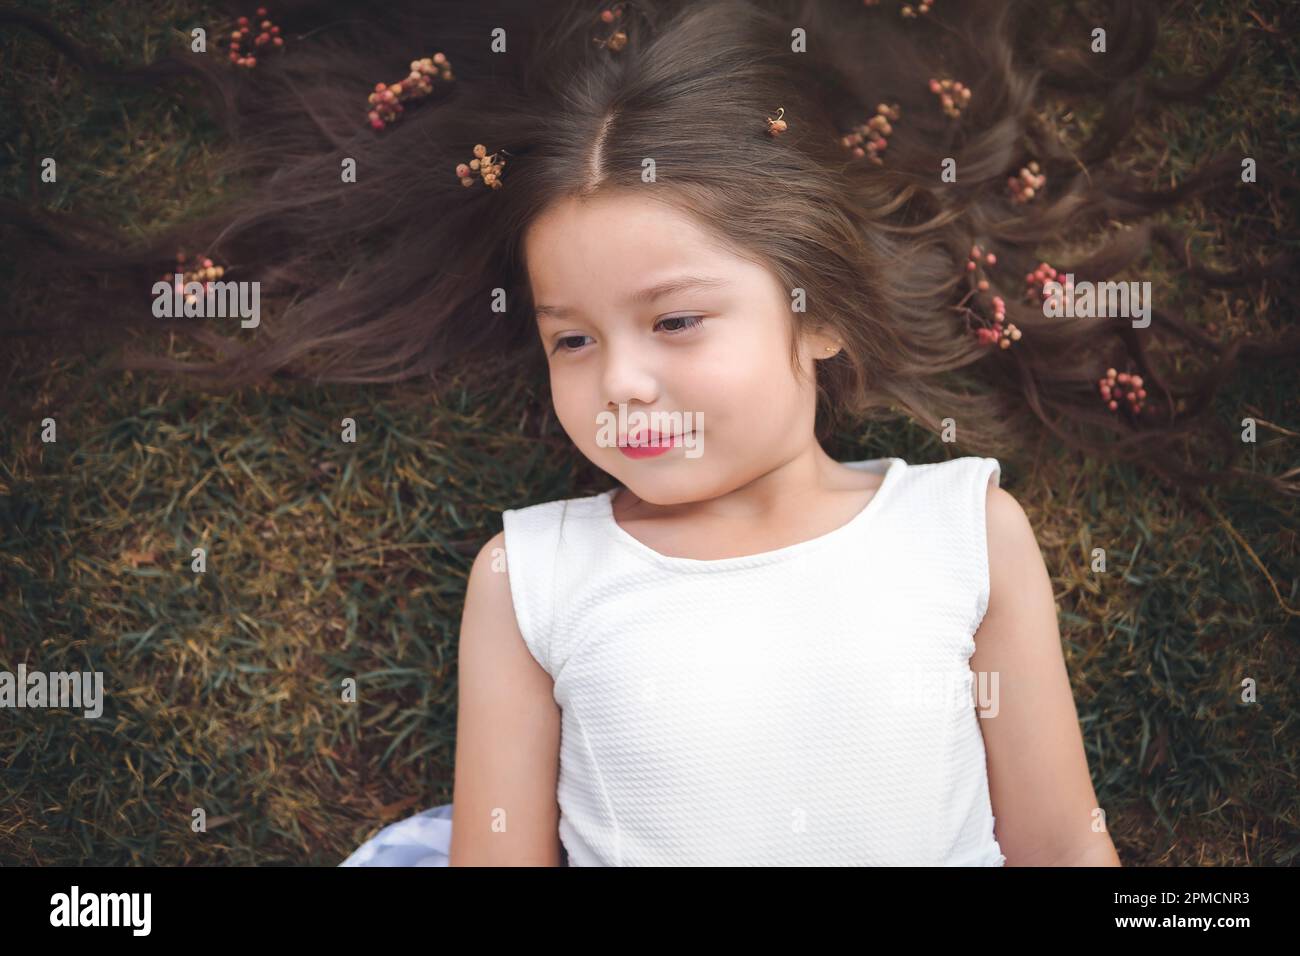 Little girl in white dress lying on the grass, she is smiling and her hair is very long and princess-like, children's day theme. Stock Photo